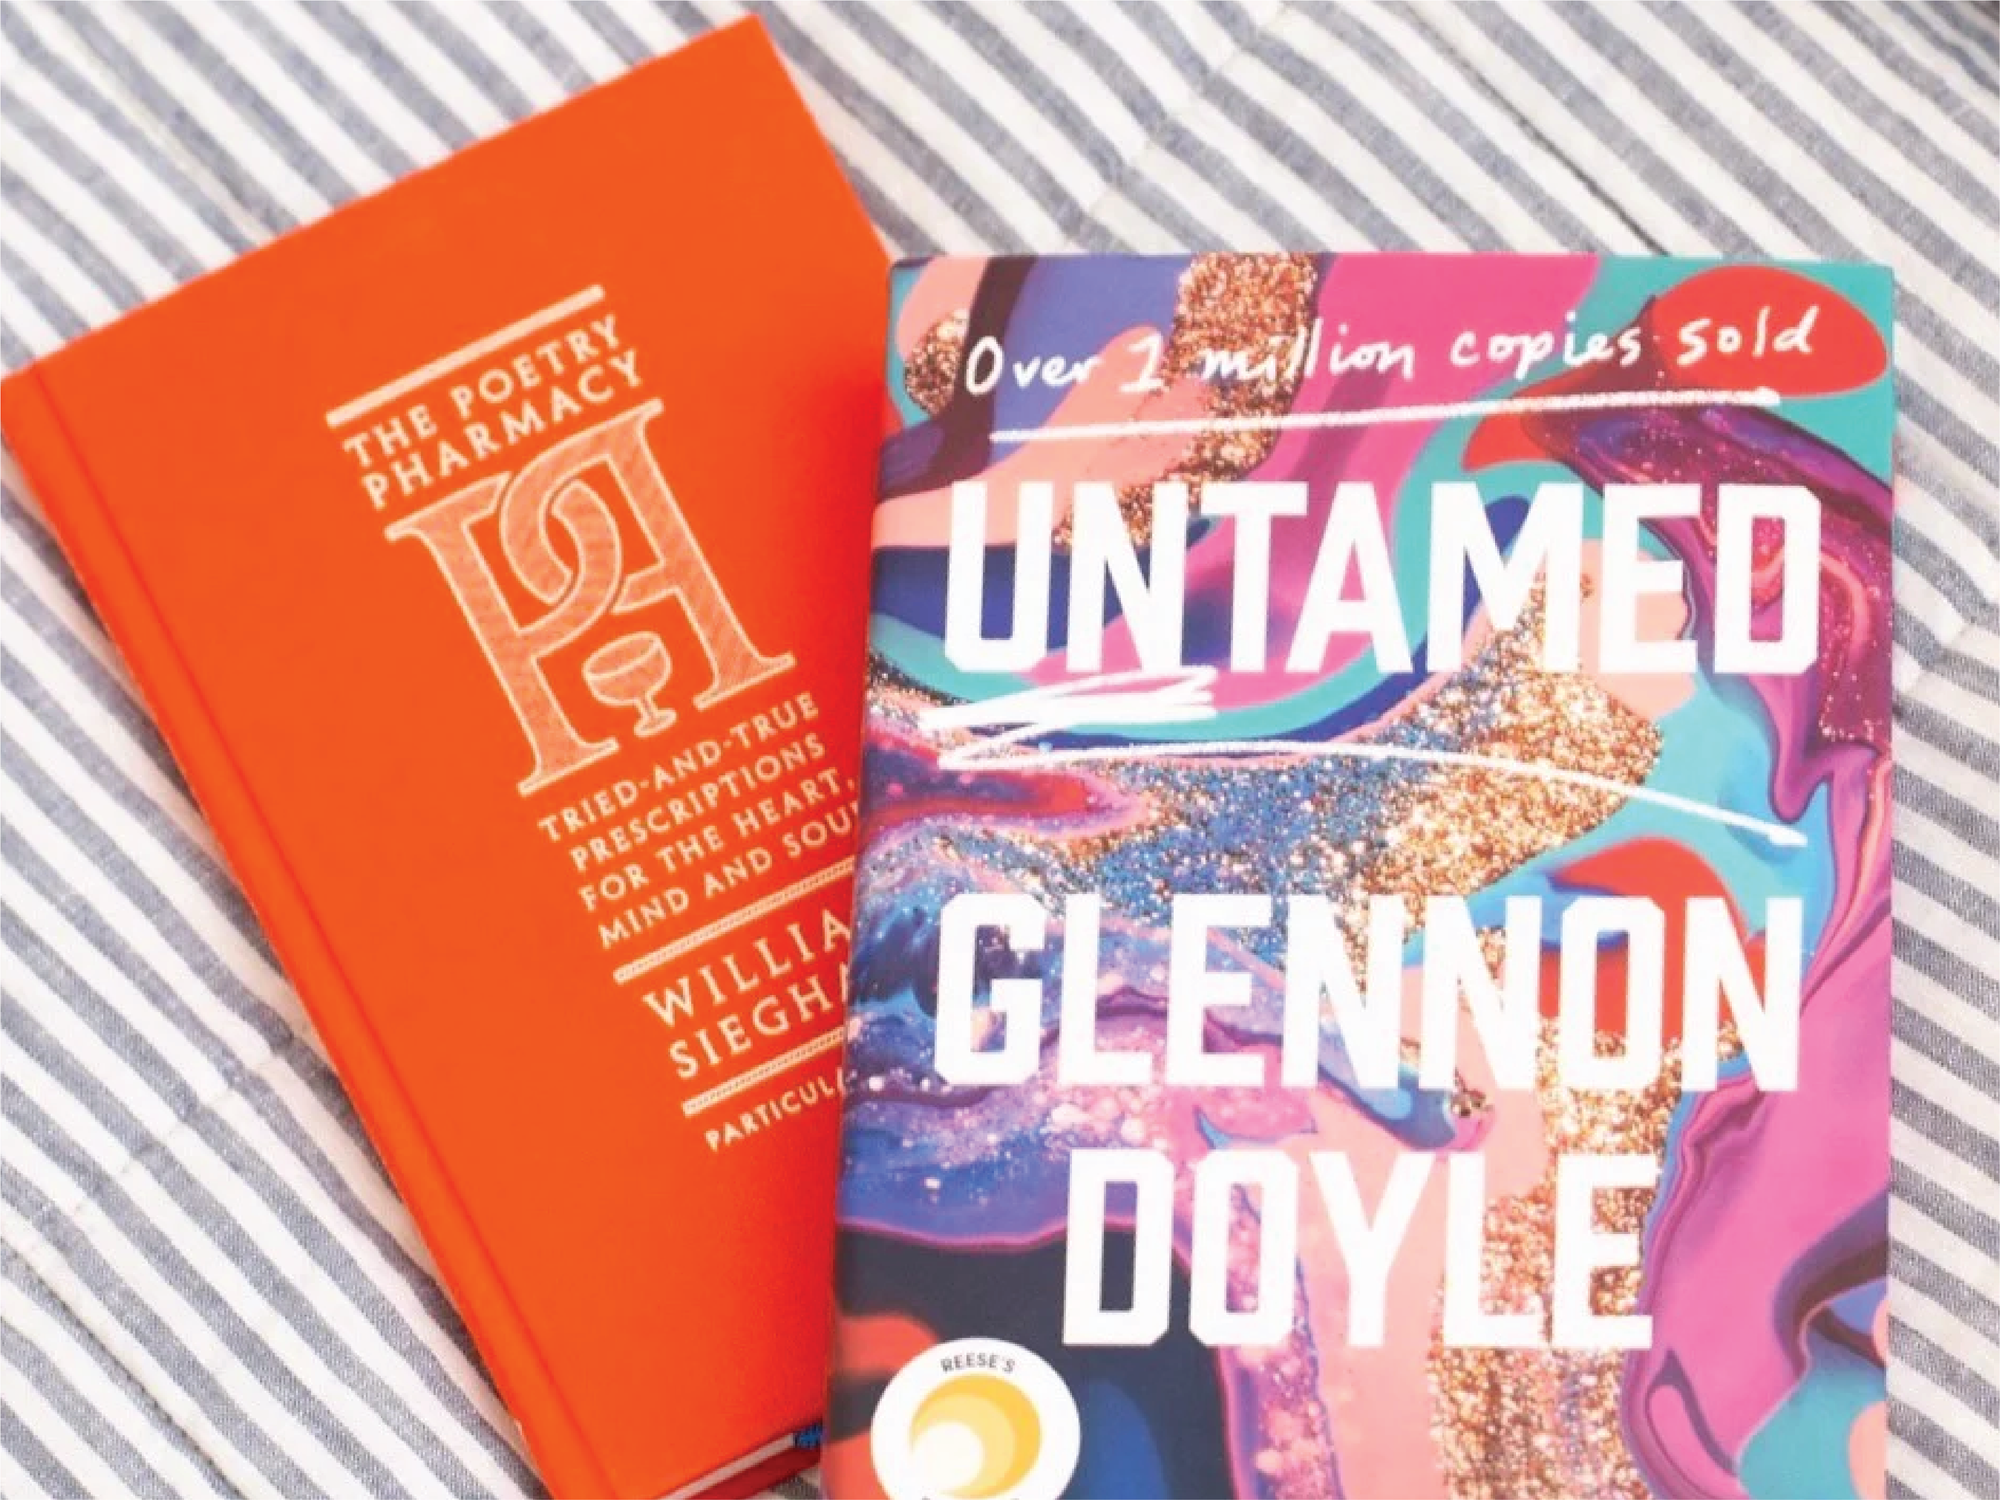 Read This: Untamed and The Poetry Pharmacy